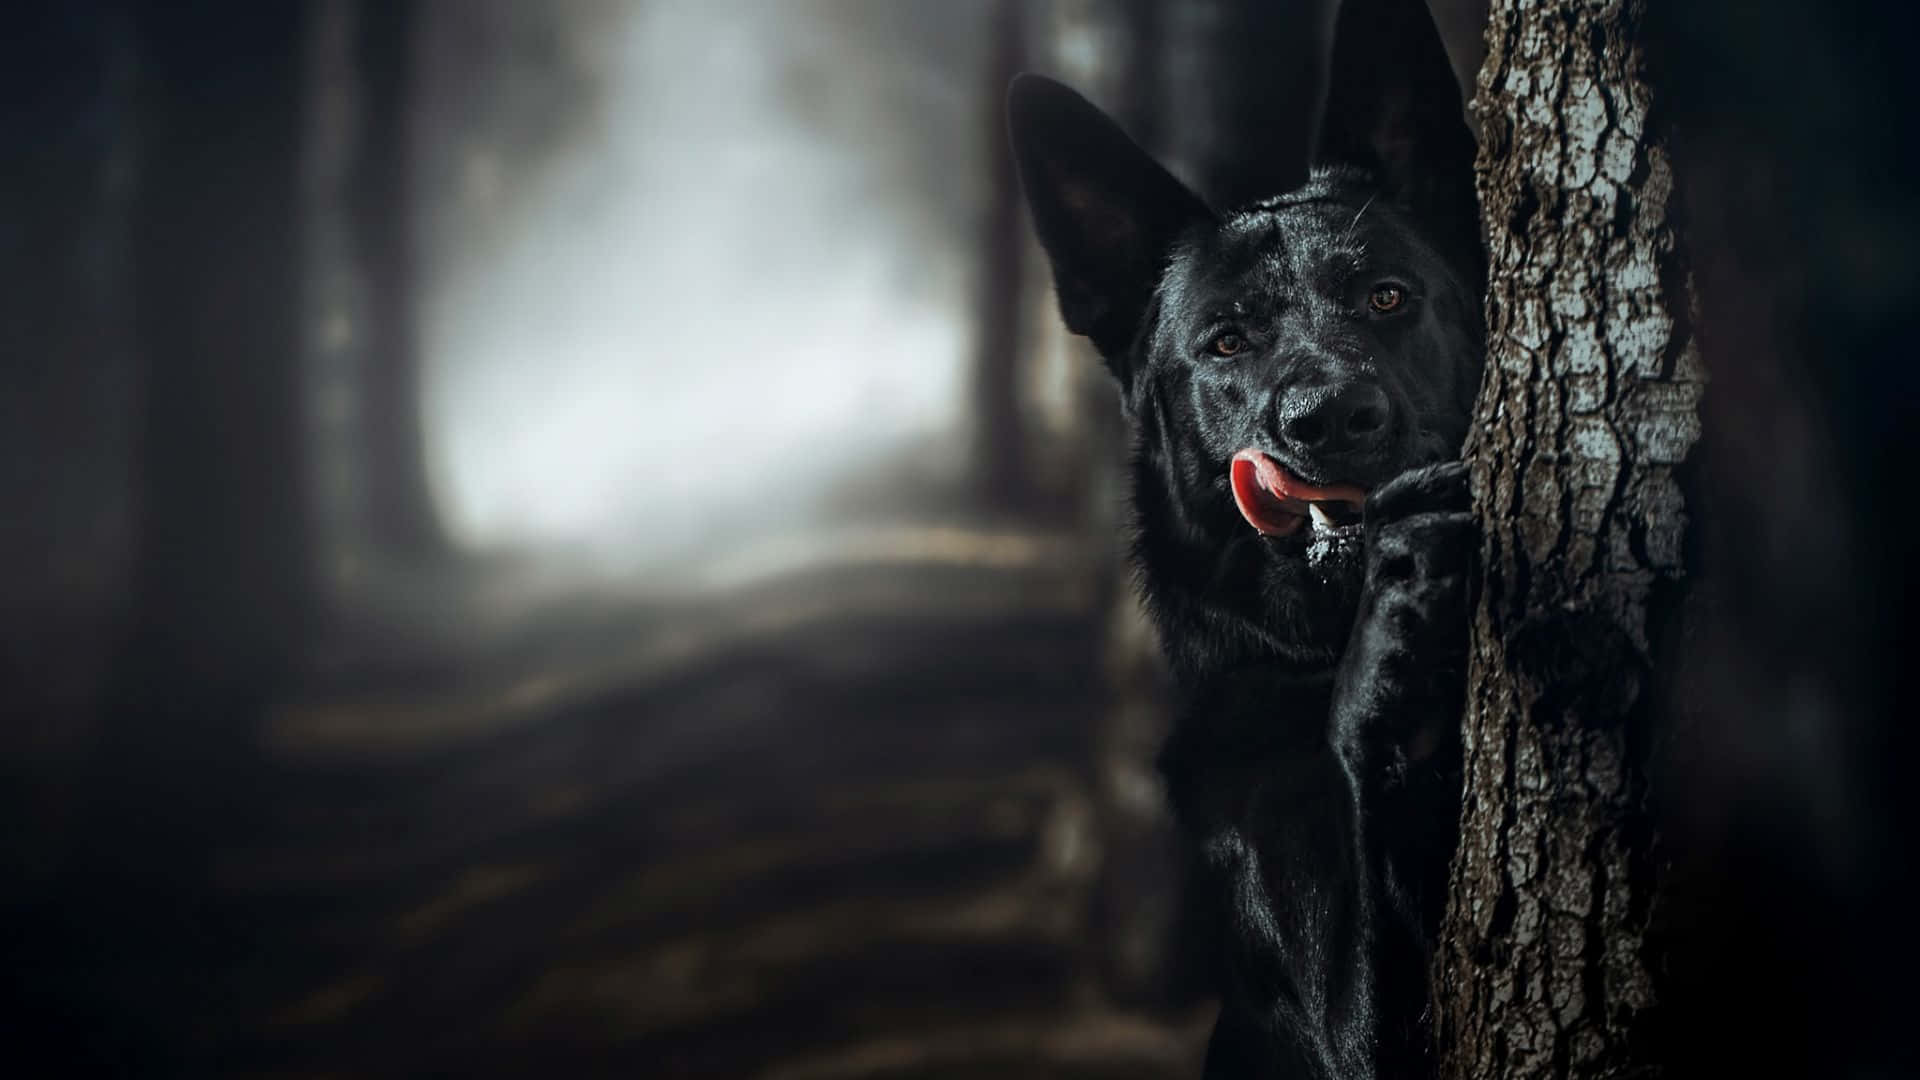 A Black Dog Is Peeking Out Of A Tree In The Dark